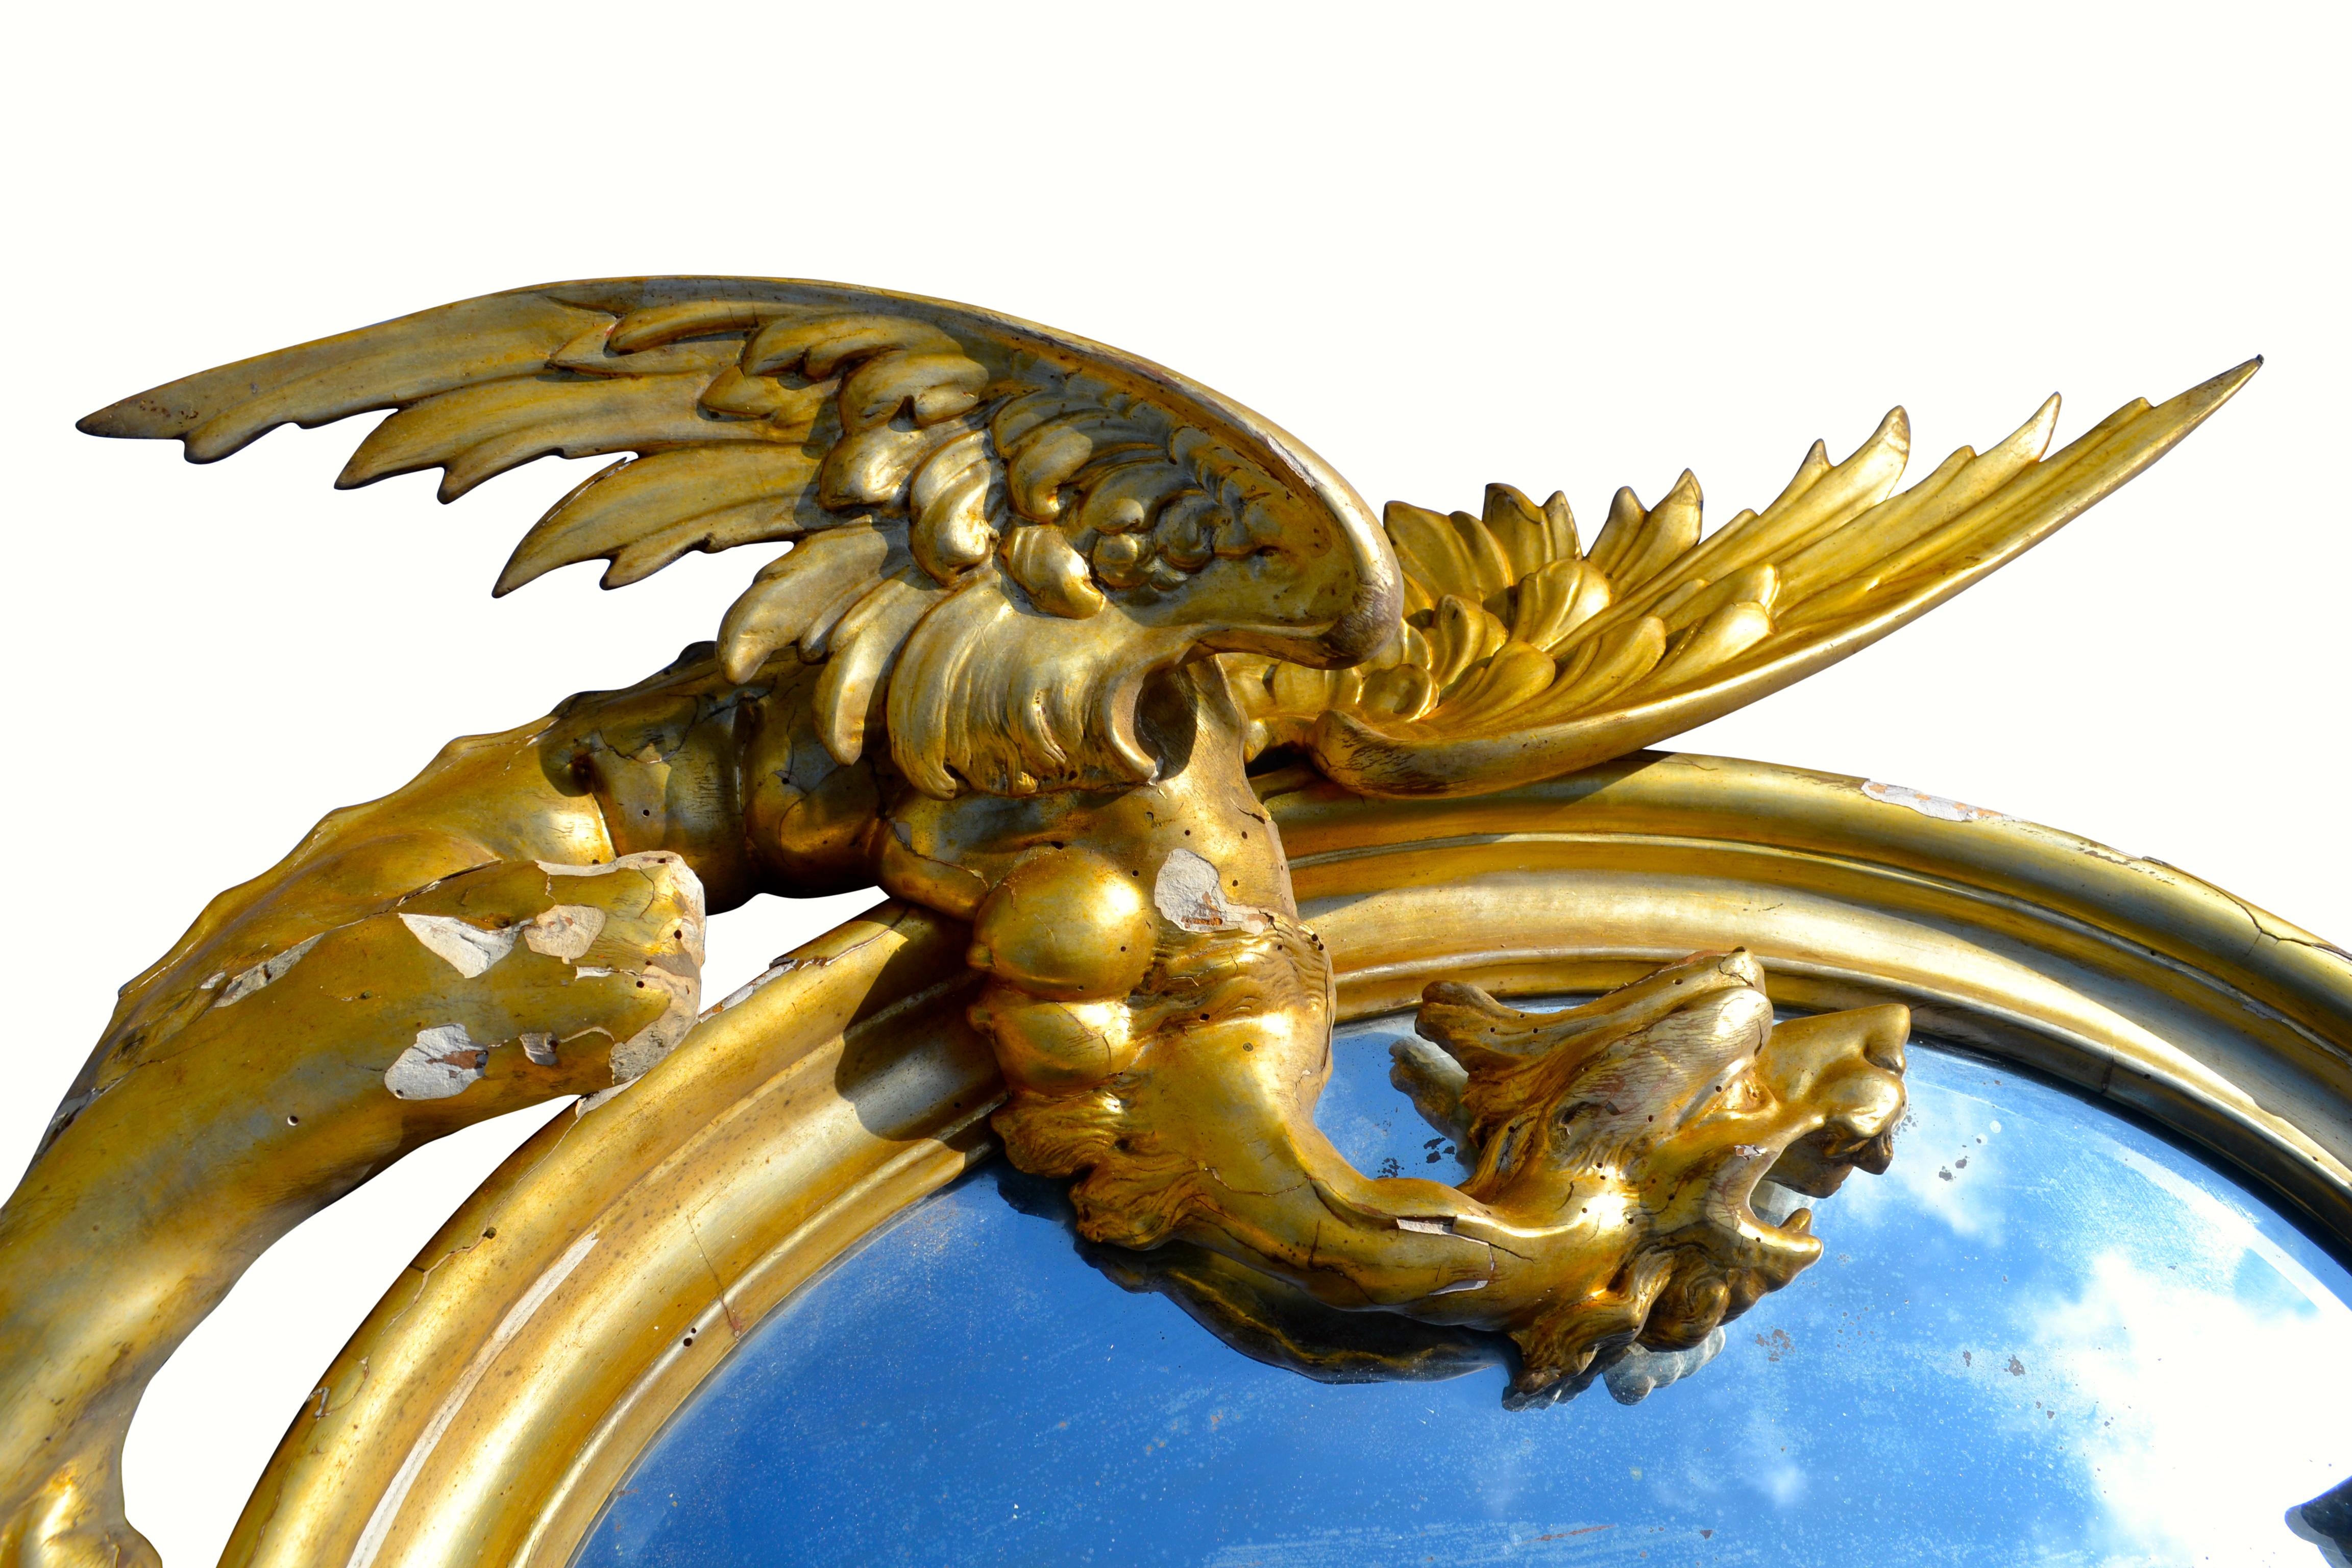 Pair of Venetian 18th-19th Century Rococo Dragon and Bird Mirrors and Consoles For Sale 4